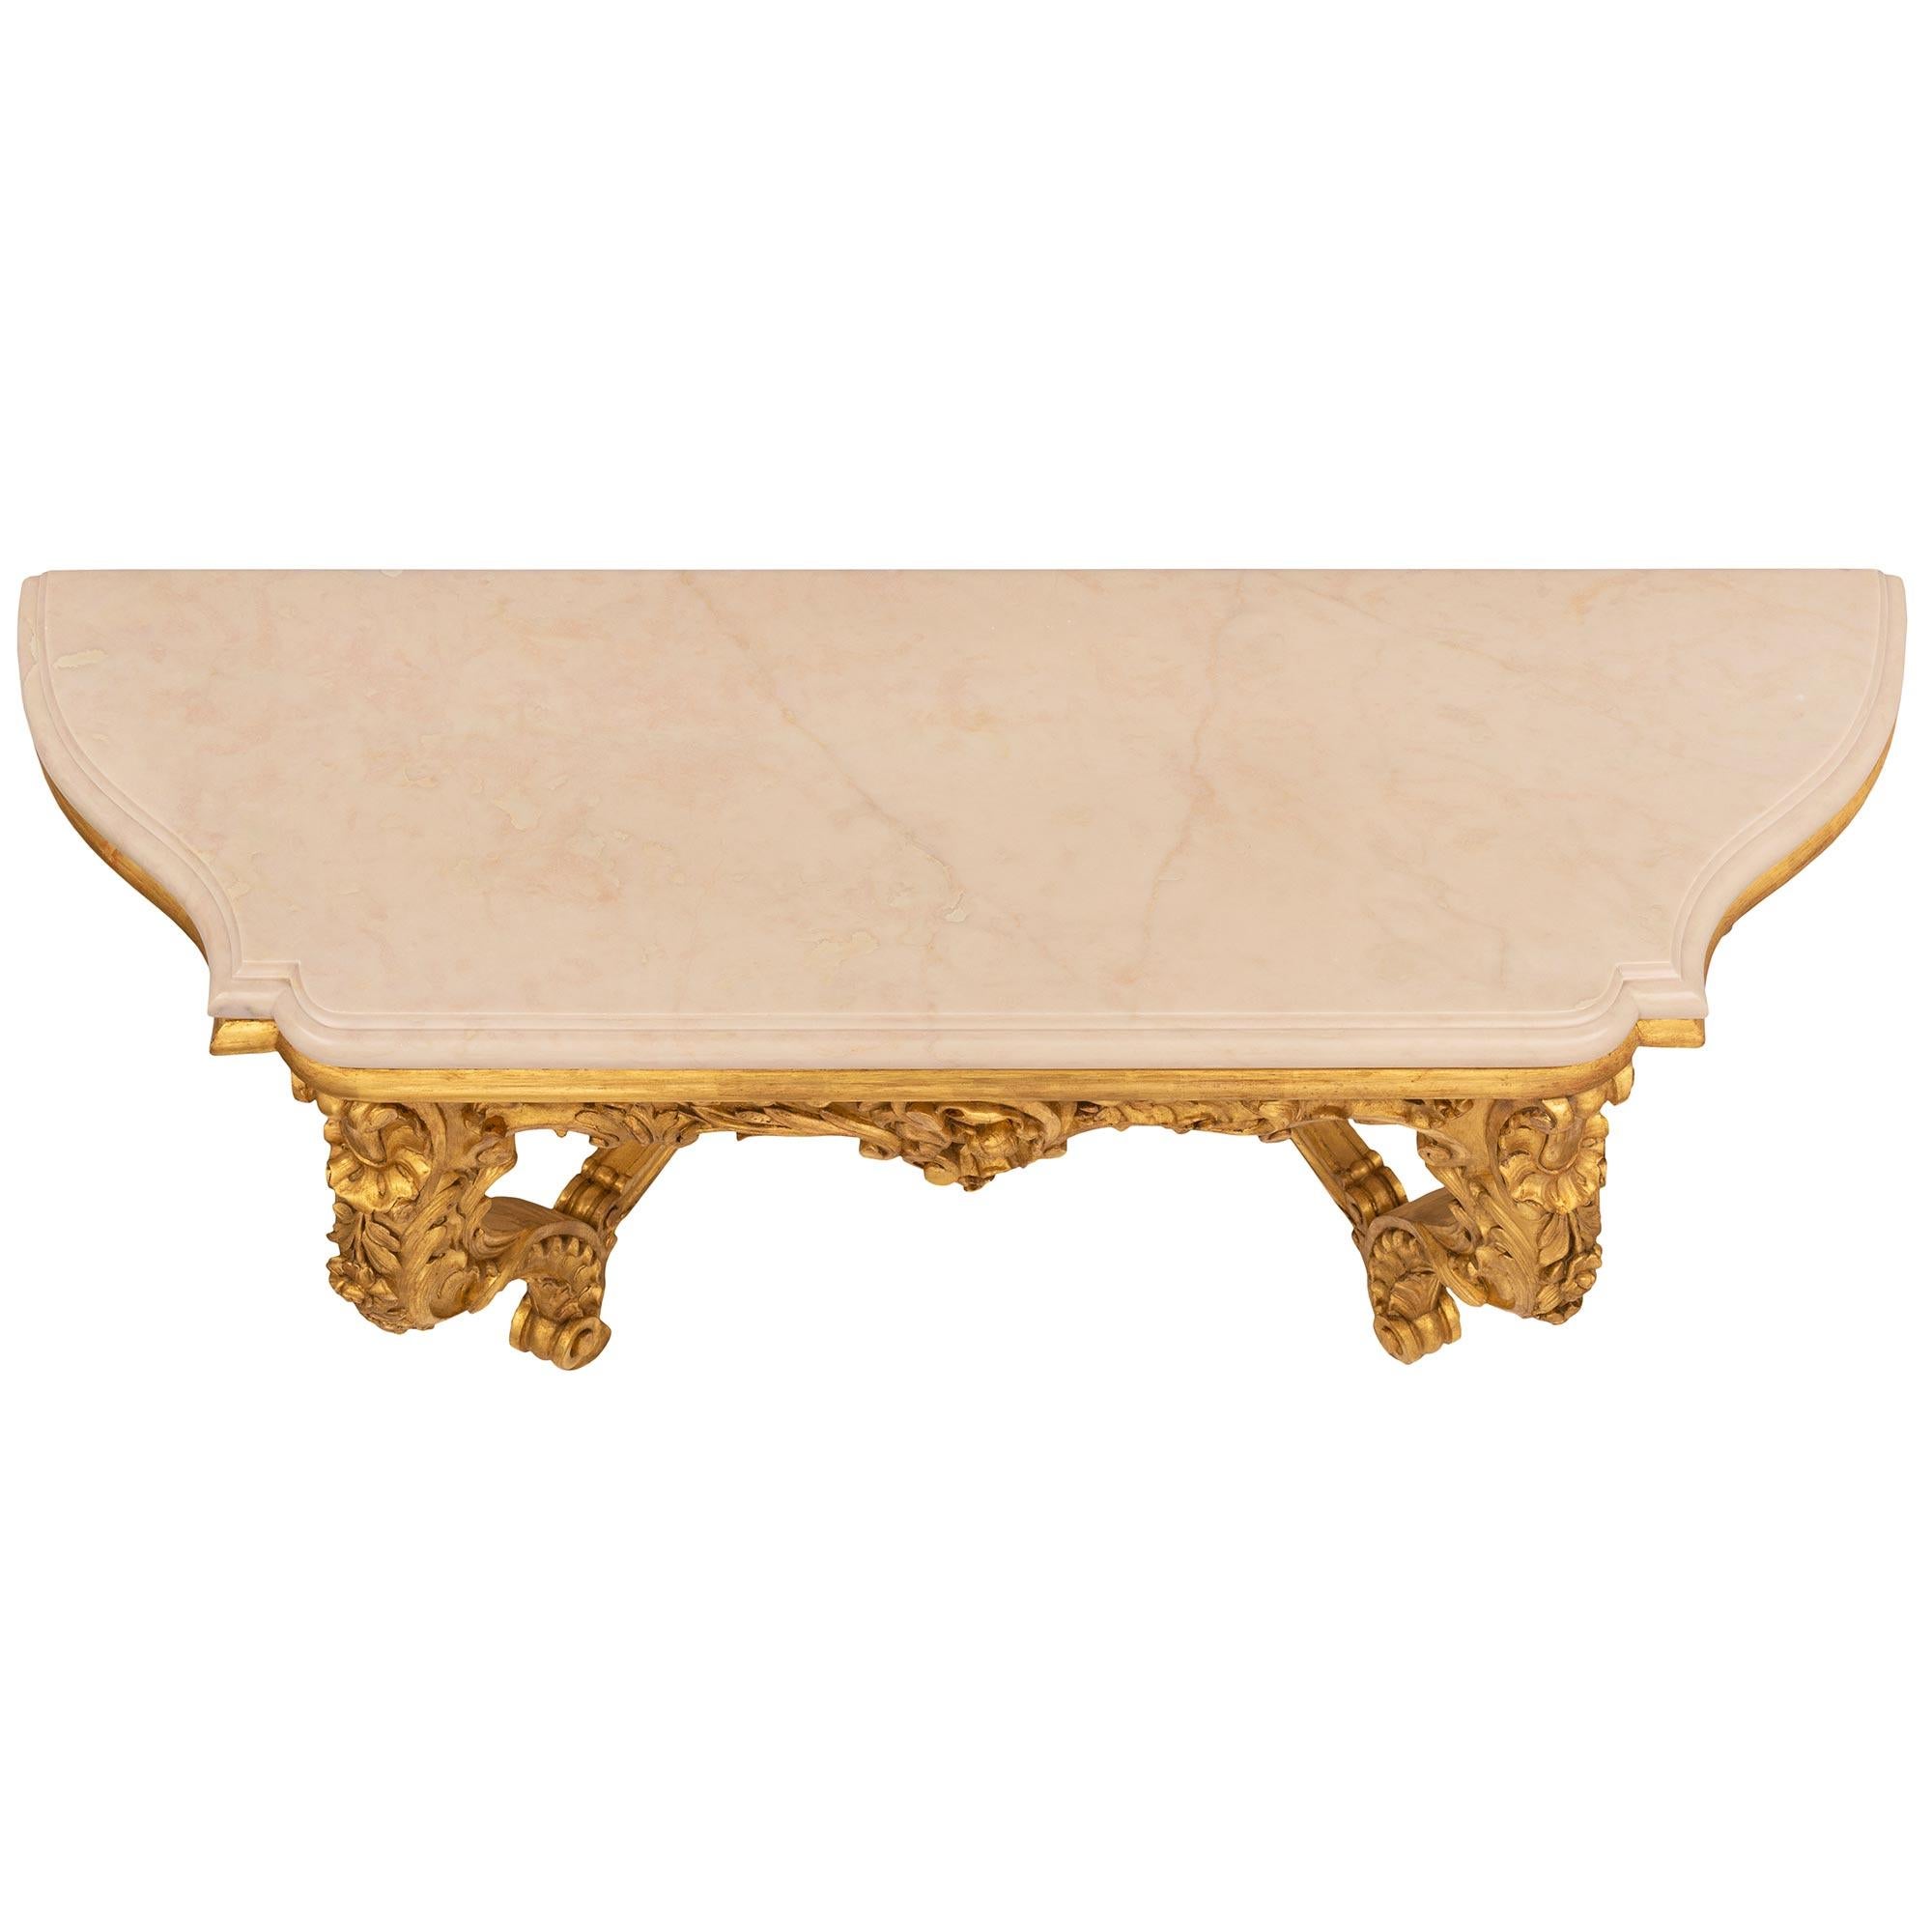 A stunning Italian 19th century Louis XV st. giltwood and Jaune de Valence marble console. The wall mounted console is raised by outstanding scrolled tapered legs with charming feet adorned with large acanthus leaves, gadroon movements, and charming